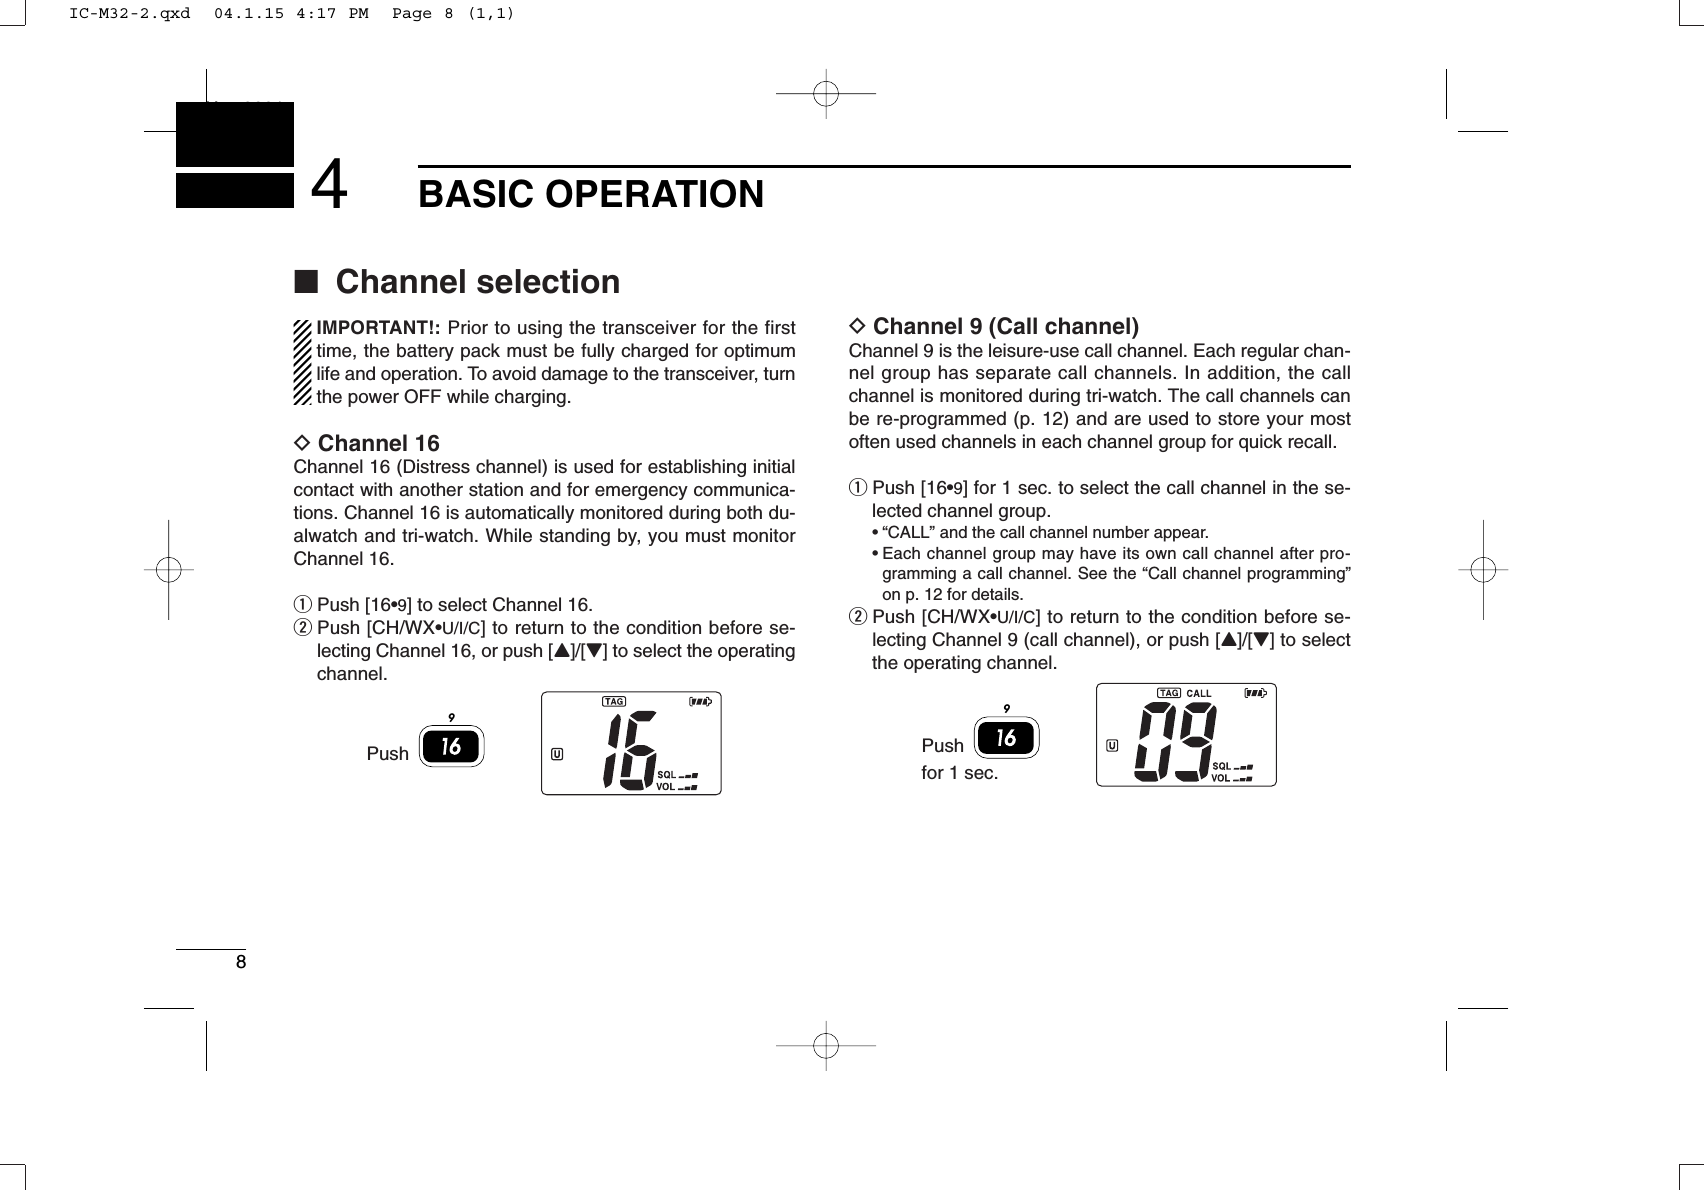 8BASIC OPERATIONNew20014■Channel selectionIMPORTANT!: Prior to using the transceiver for the firsttime, the battery pack must be fully charged for optimumlife and operation. To avoid damage to the transceiver, turnthe power OFF while charging.DChannel 16Channel 16 (Distress channel) is used for establishing initialcontact with another station and for emergency communica-tions. Channel 16 is automatically monitored during both du-alwatch and tri-watch. While standing by, you must monitorChannel 16.qPush [16•9] to select Channel 16.wPush [CH/WX•U/I/C] to return to the condition before se-lecting Channel 16, or push [Y]/[Z] to select the operatingchannel.DChannel 9 (Call channel)Channel 9 is the leisure-use call channel. Each regular chan-nel group has separate call channels. In addition, the callchannel is monitored during tri-watch. The call channels canbe re-programmed (p. 12) and are used to store your mostoften used channels in each channel group for quick recall.qPush [16•9] for 1 sec. to select the call channel in the se-lected channel group.•“CALL” and the call channel number appear.•Each channel group may have its own call channel after pro-gramming a call channel. See the “Call channel programming”on p. 12 for details.wPush [CH/WX•U/I/C] to return to the condition before se-lecting Channel 9 (call channel), or push [Y]/[Z] to selectthe operating channel.9Pushfor 1 sec.9PushIC-M32-2.qxd  04.1.15 4:17 PM  Page 8 (1,1)